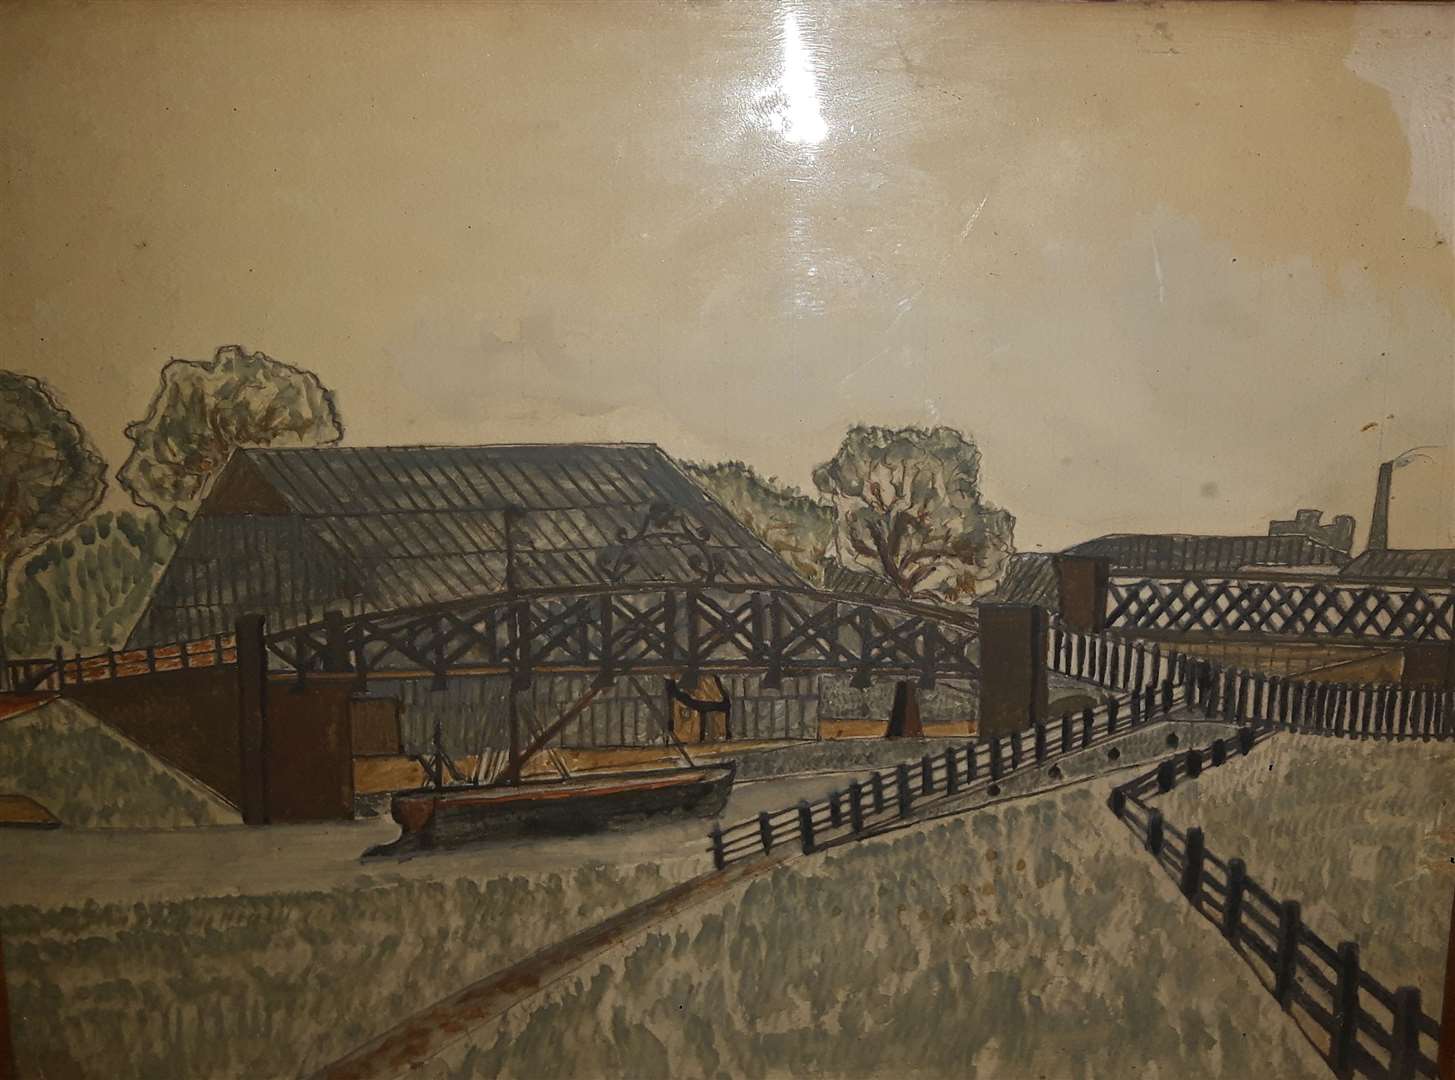 The bridges at Tovil: A painting by Alfred Butler in 1931